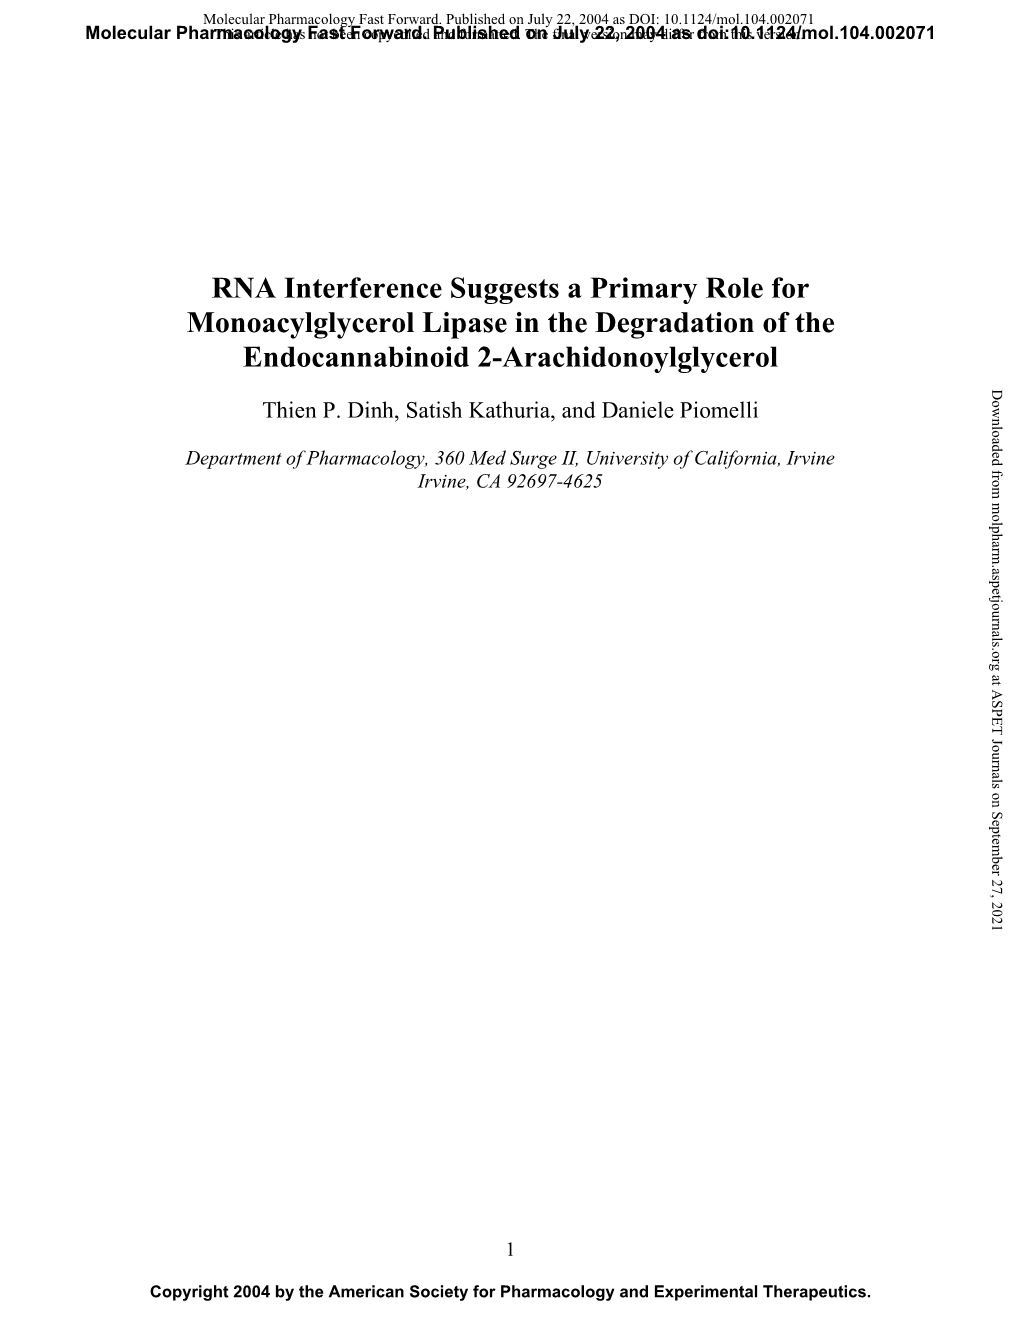 RNA Interference Suggests a Primary Role for Monoacylglycerol Lipase in the Degradation of the Endocannabinoid 2-Arachidonoylglycerol